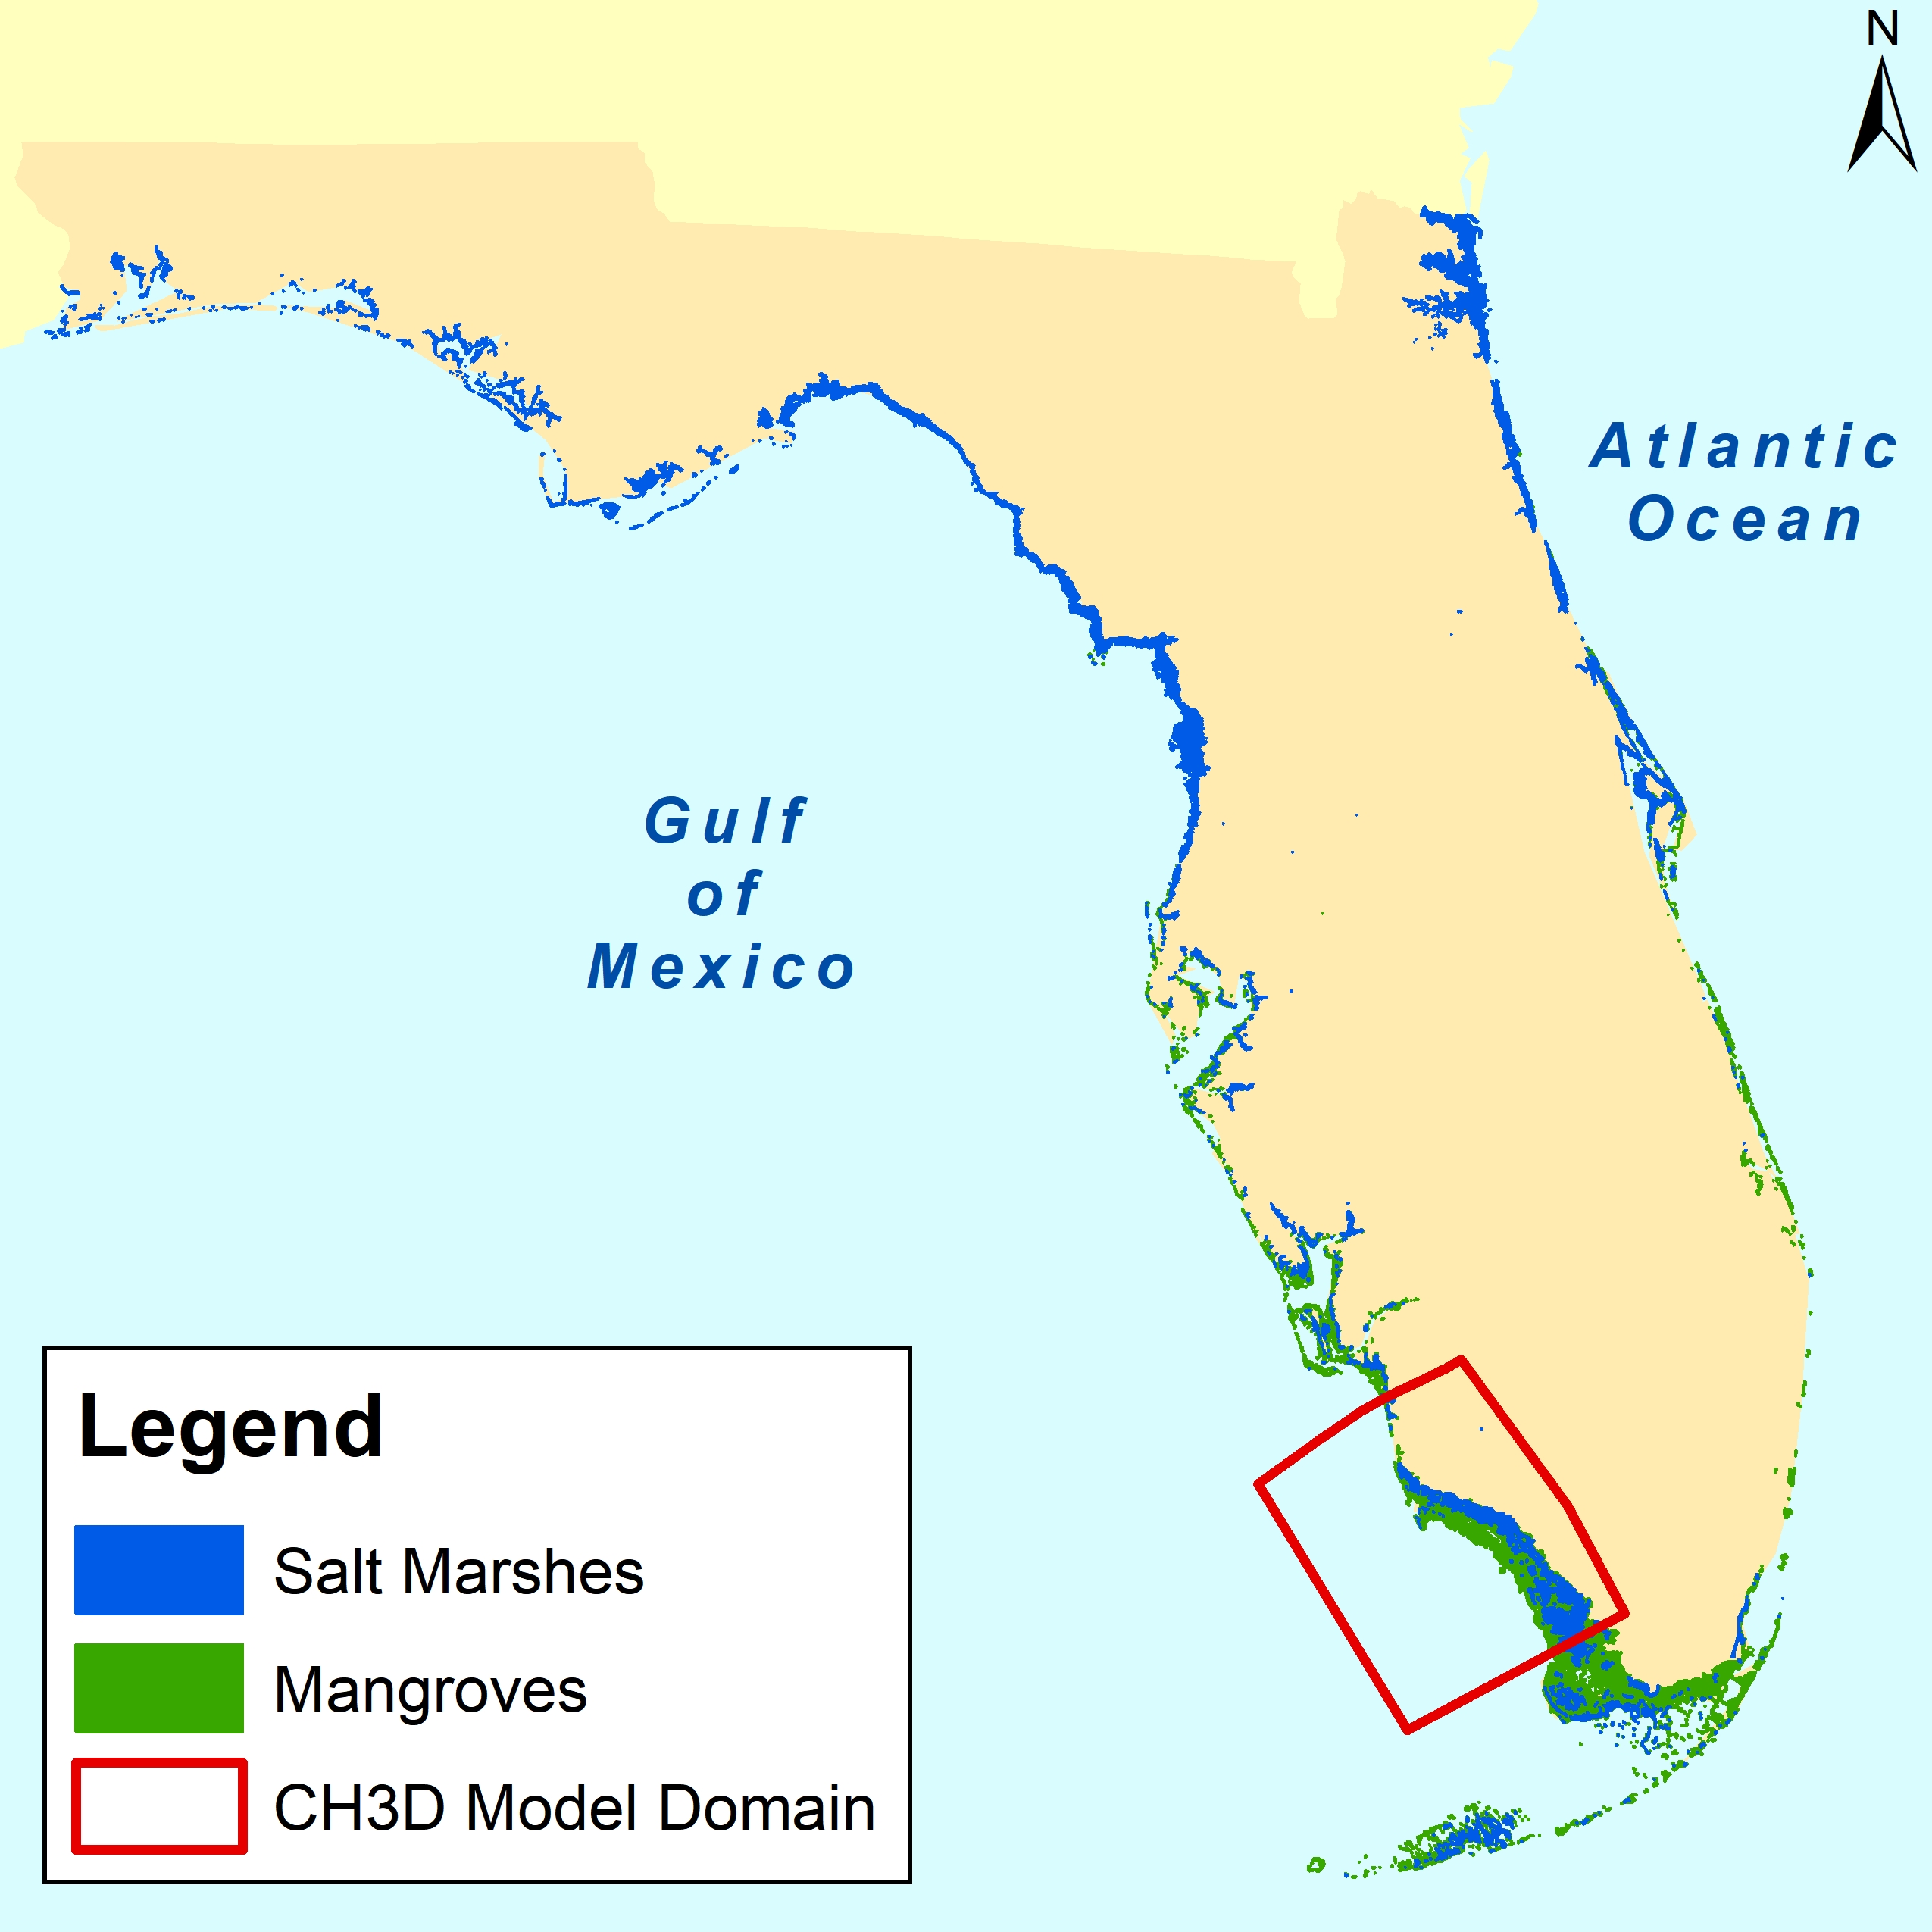 The project focuses on Southwest Florida (red box on map), which has both salt marsh and mangrove habitat.